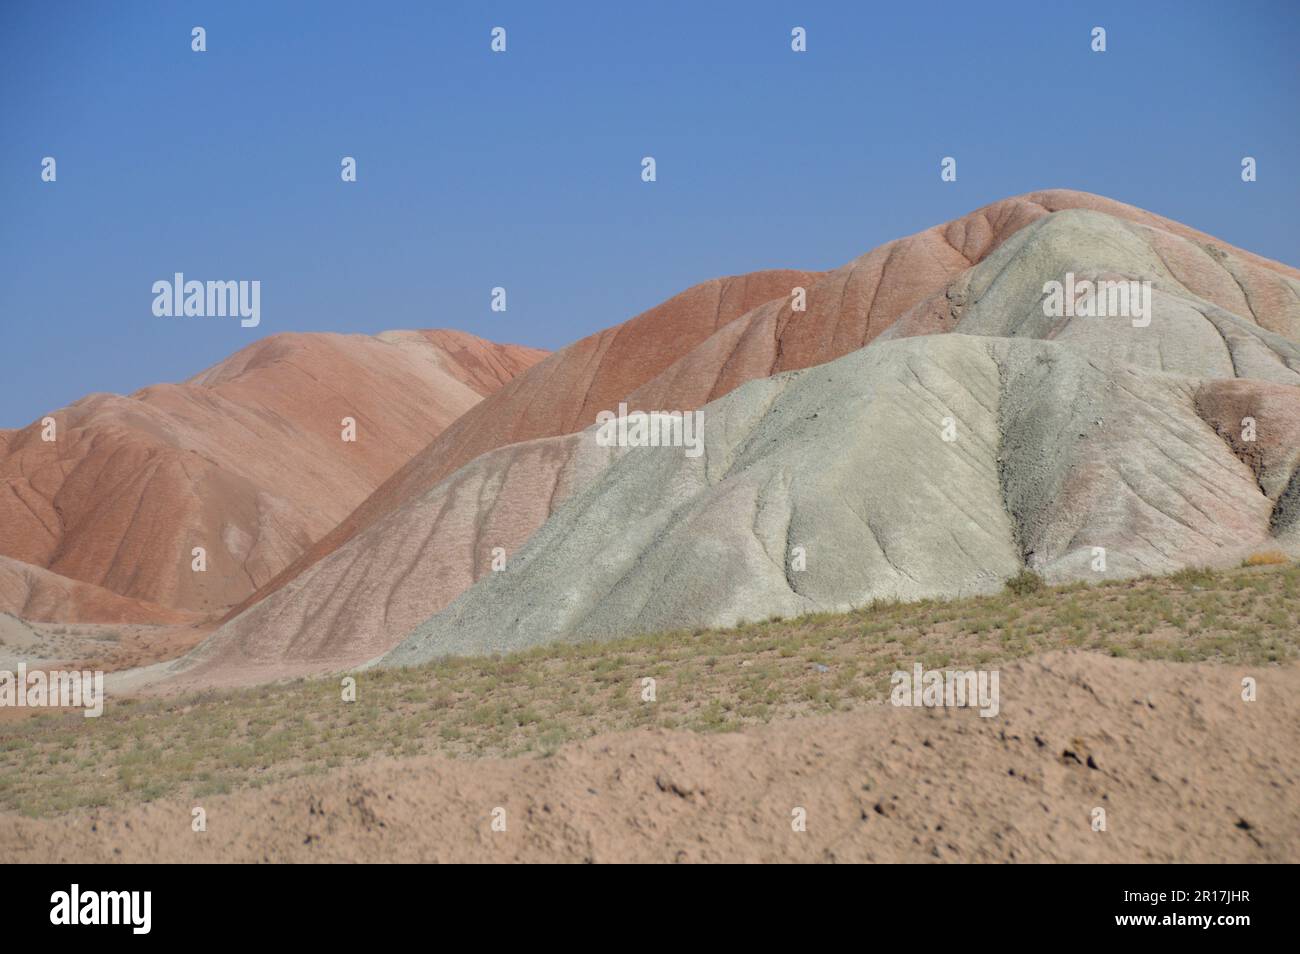 Iran:  remarkable scenery in the Kandovan area of Azarbaijan Province between Zanjan and Tabriz.  The hills are coloured by their mineral content. Stock Photo